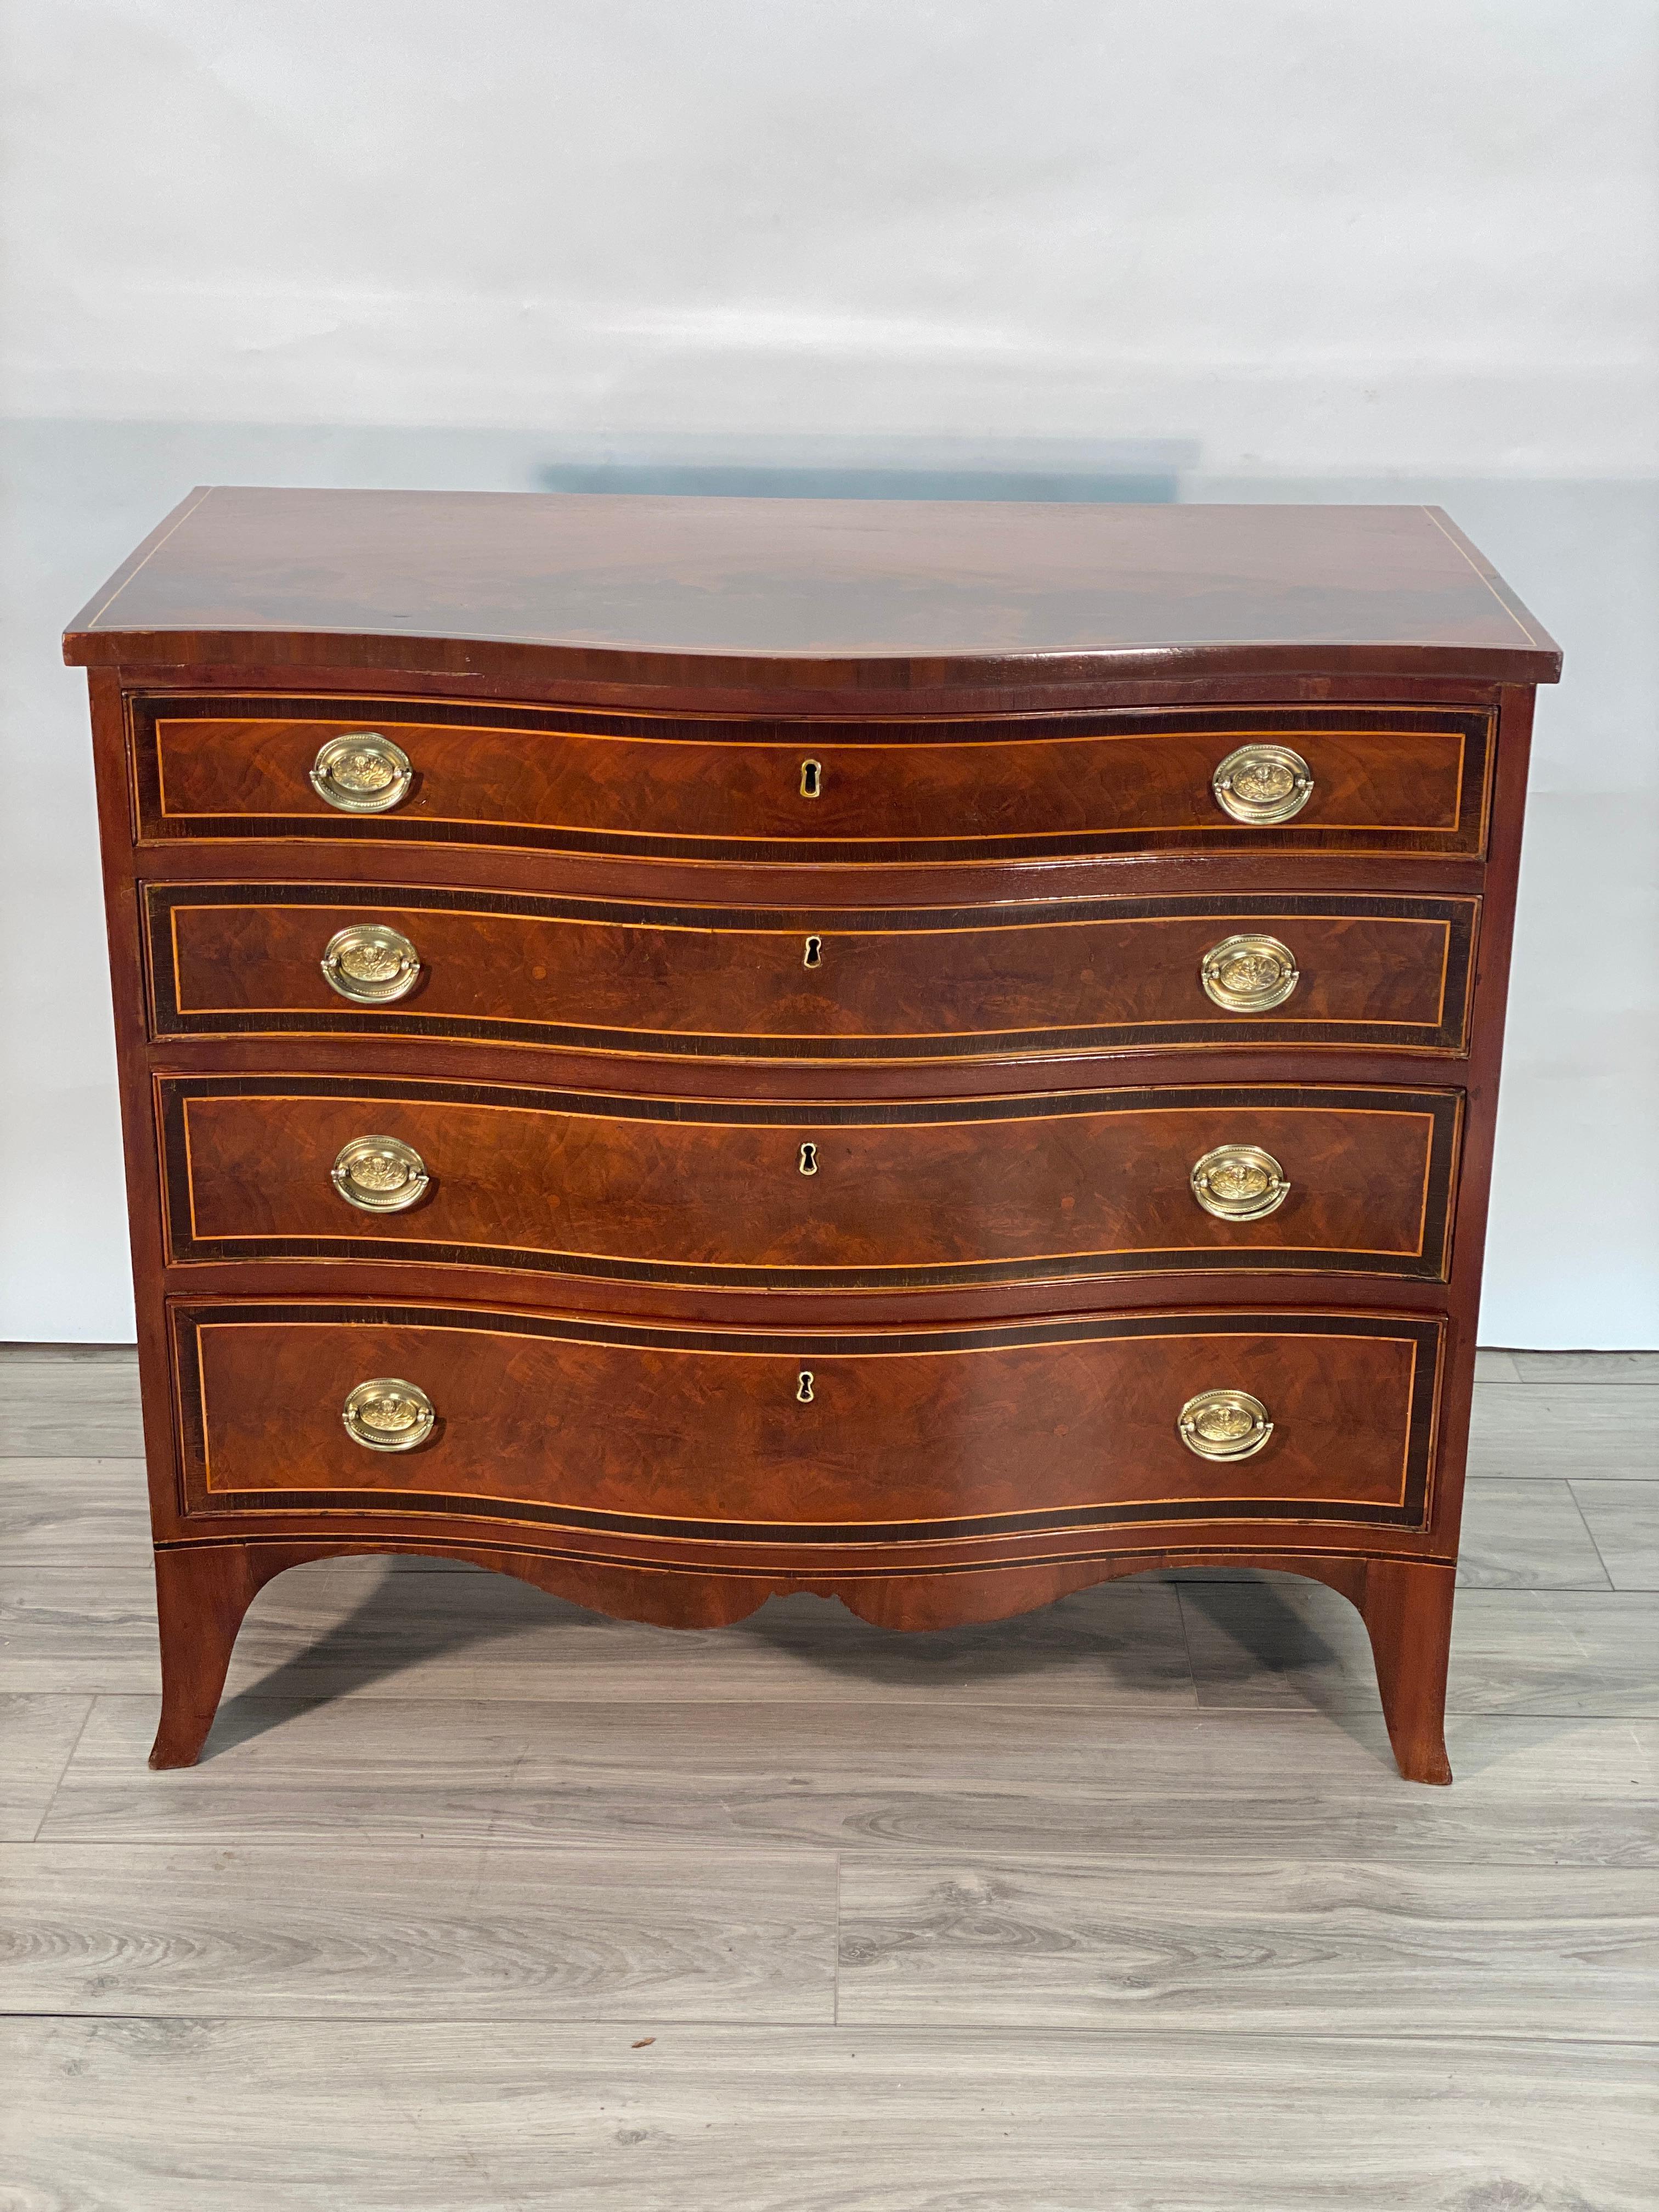 19th Century American Federal Serpentine Mahogany Chest of Drawers  2